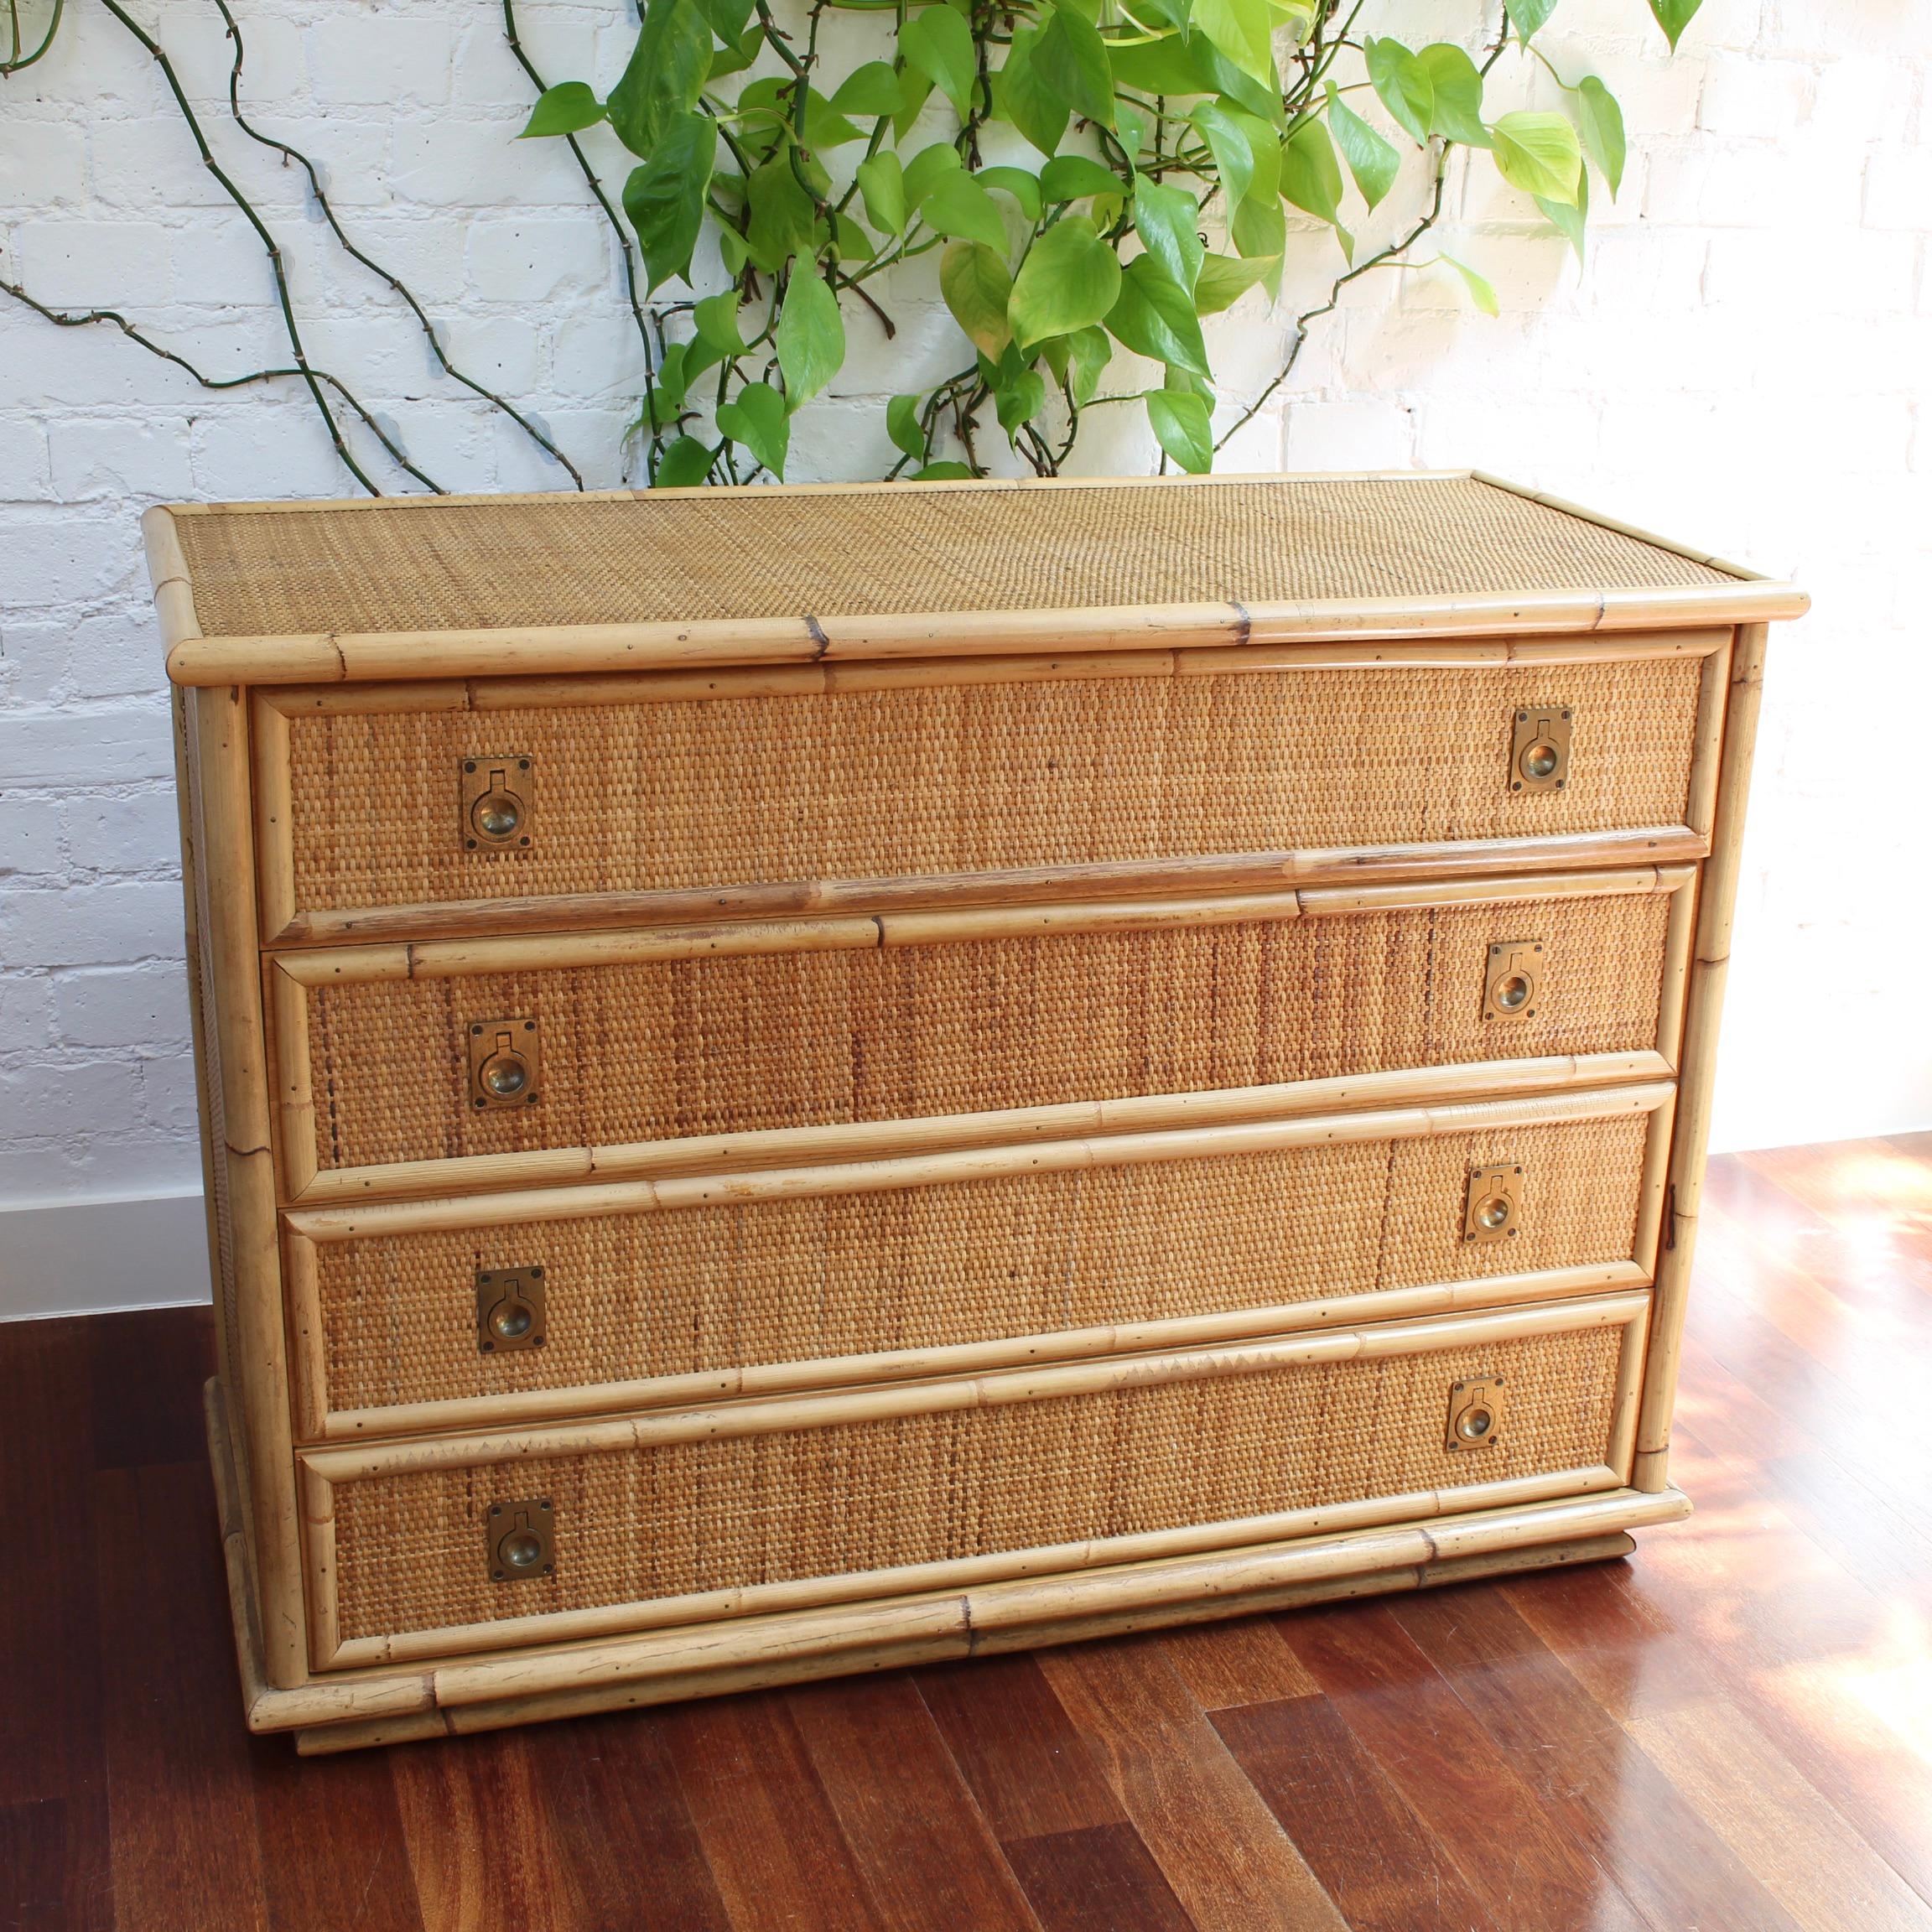 Bamboo and wicker credenza from Italian maker, Dal Vera (circa 1960s). Elegant piece with four spacious drawers and smart brass fittings. San Remo, Monte Carlo, Nice and Cannes come to mind as this distinctive furniture transports one to the glamour